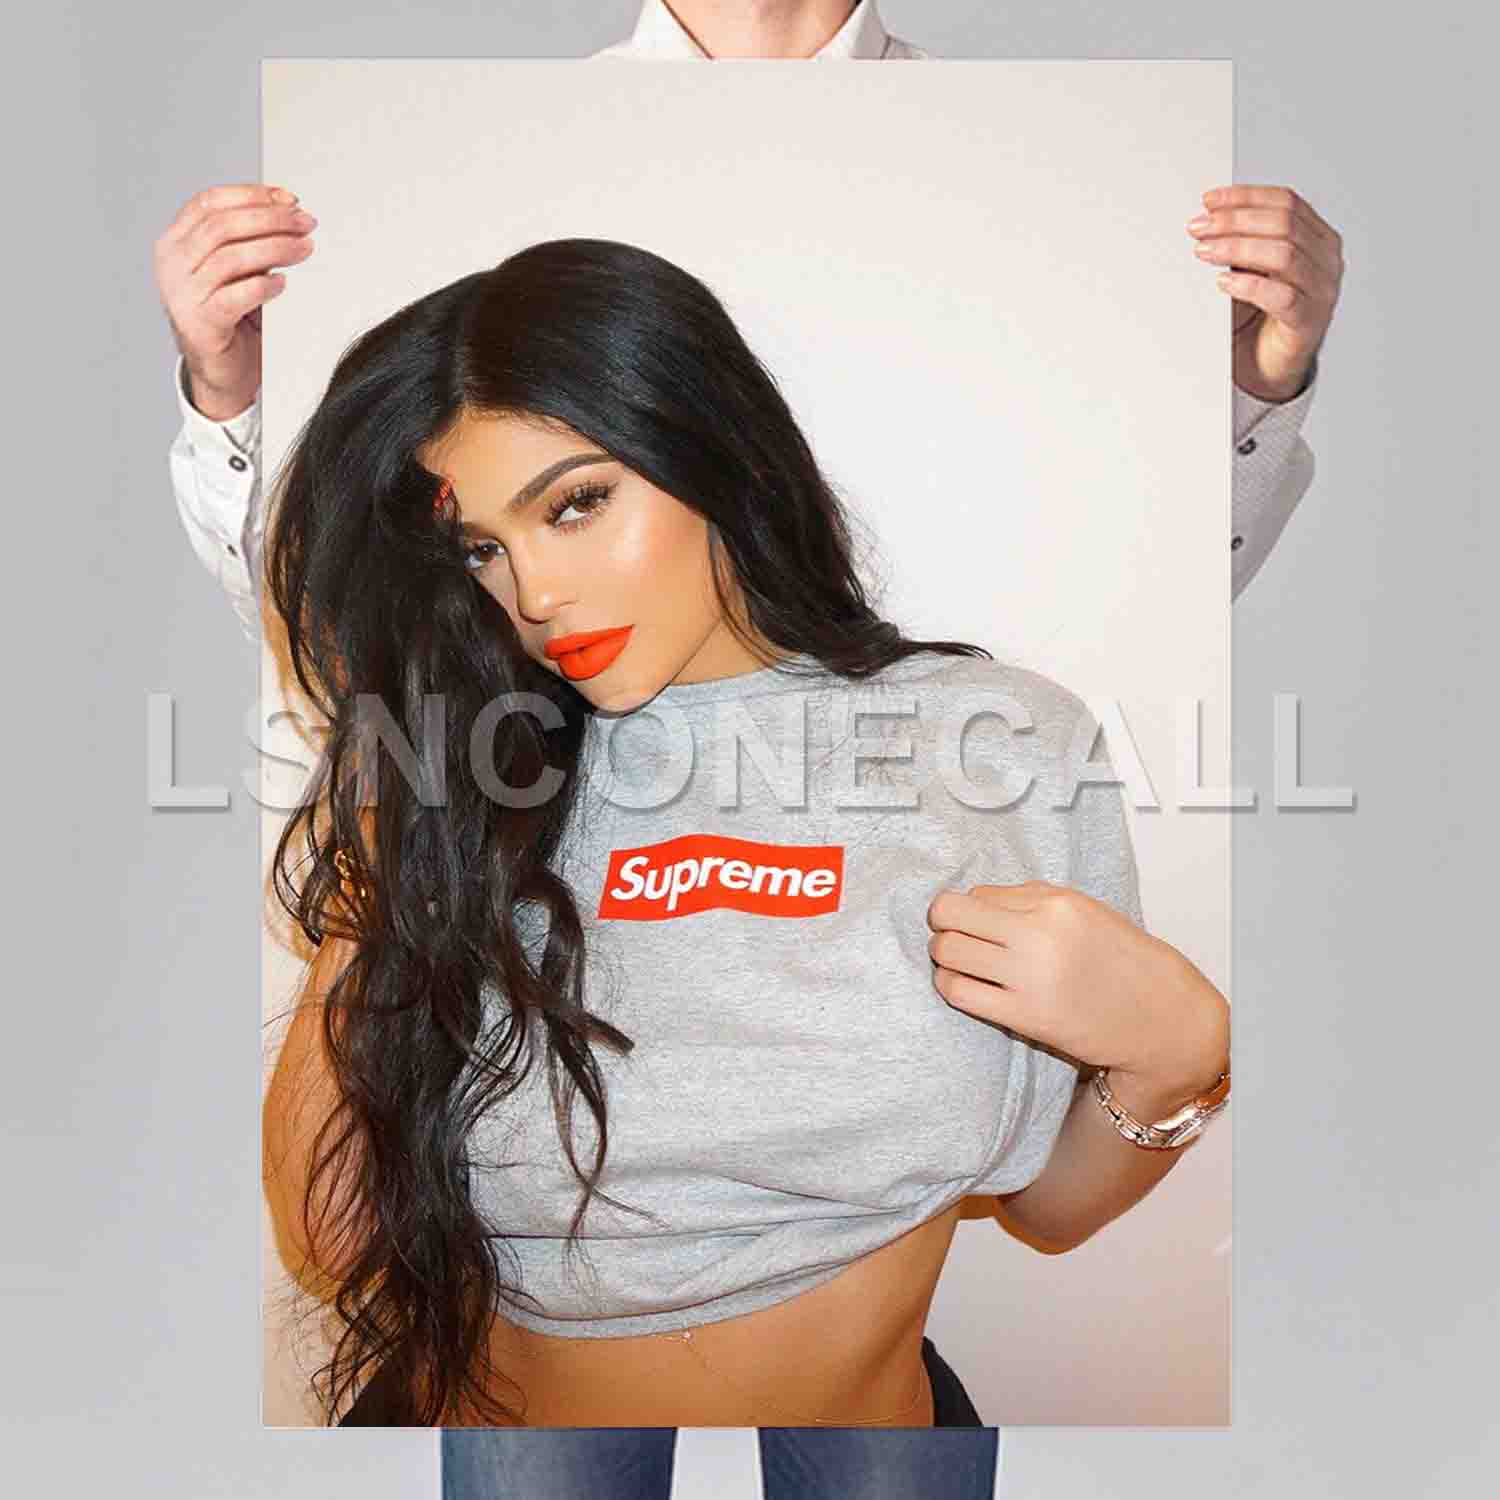 Kylie Jenner Supreme Poster - roblox poster archives lsnconecall